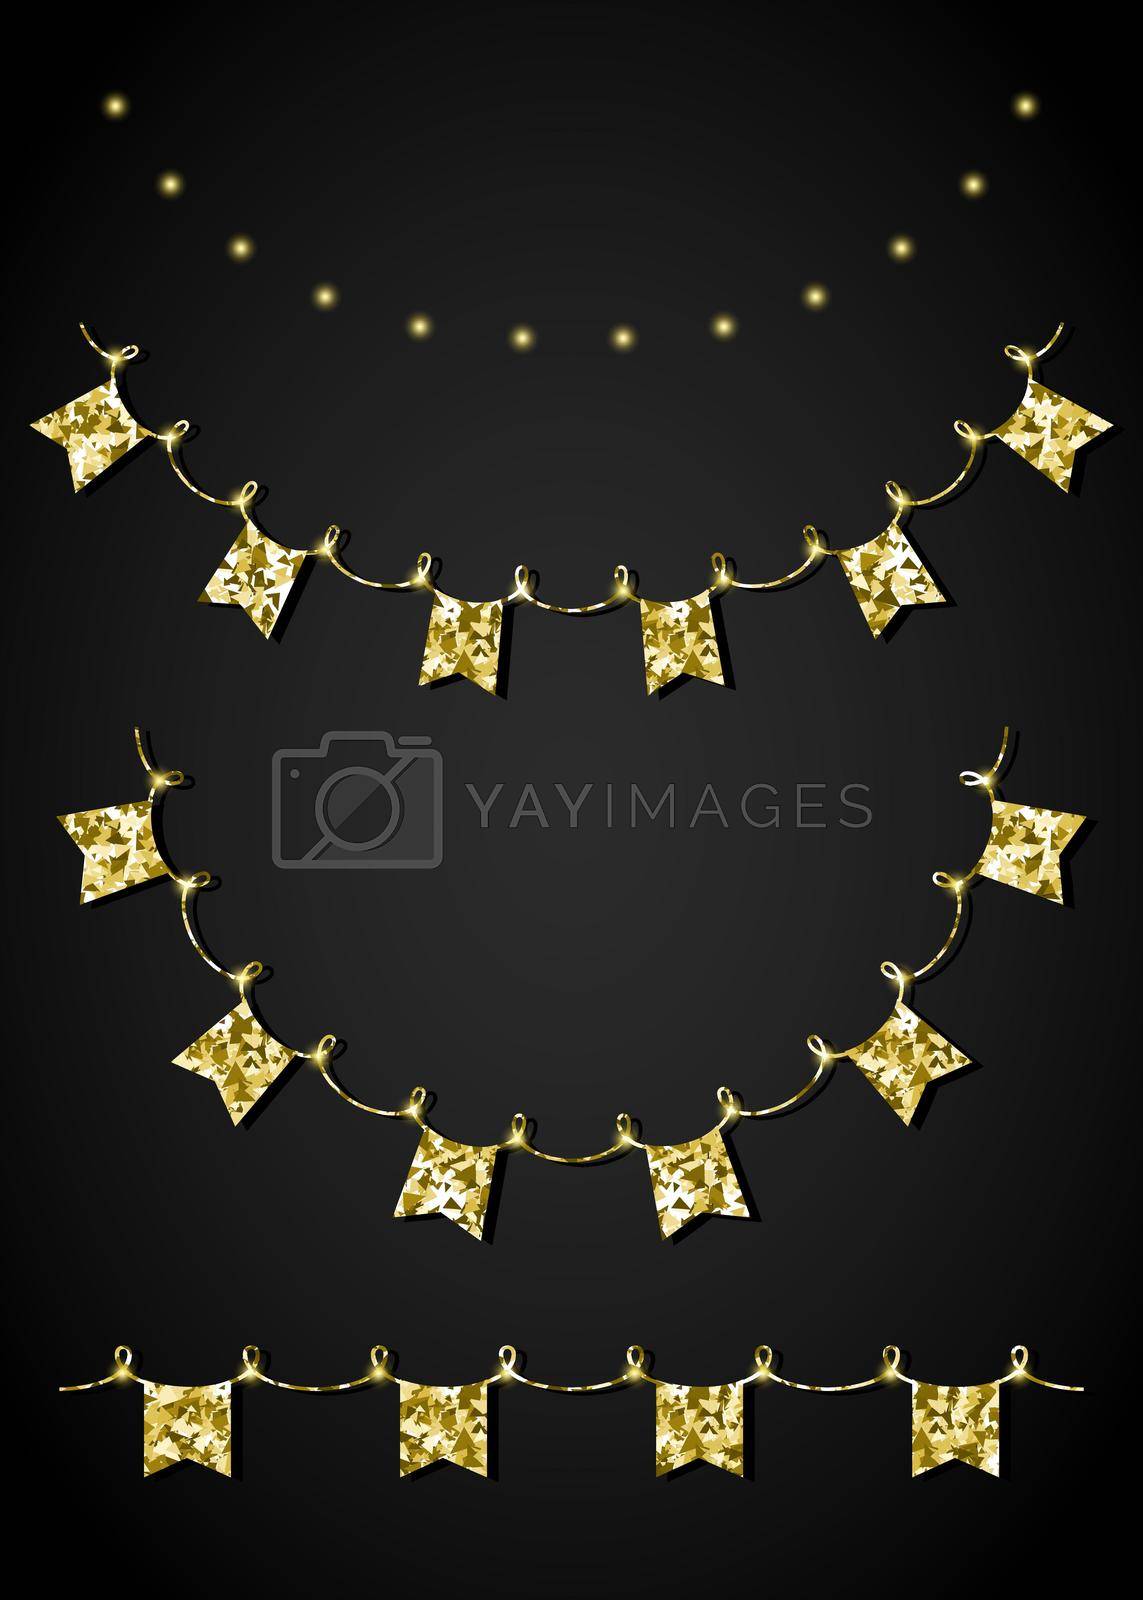 Royalty free image of Glitter golden festoon and garland by Xeniasnowstorm